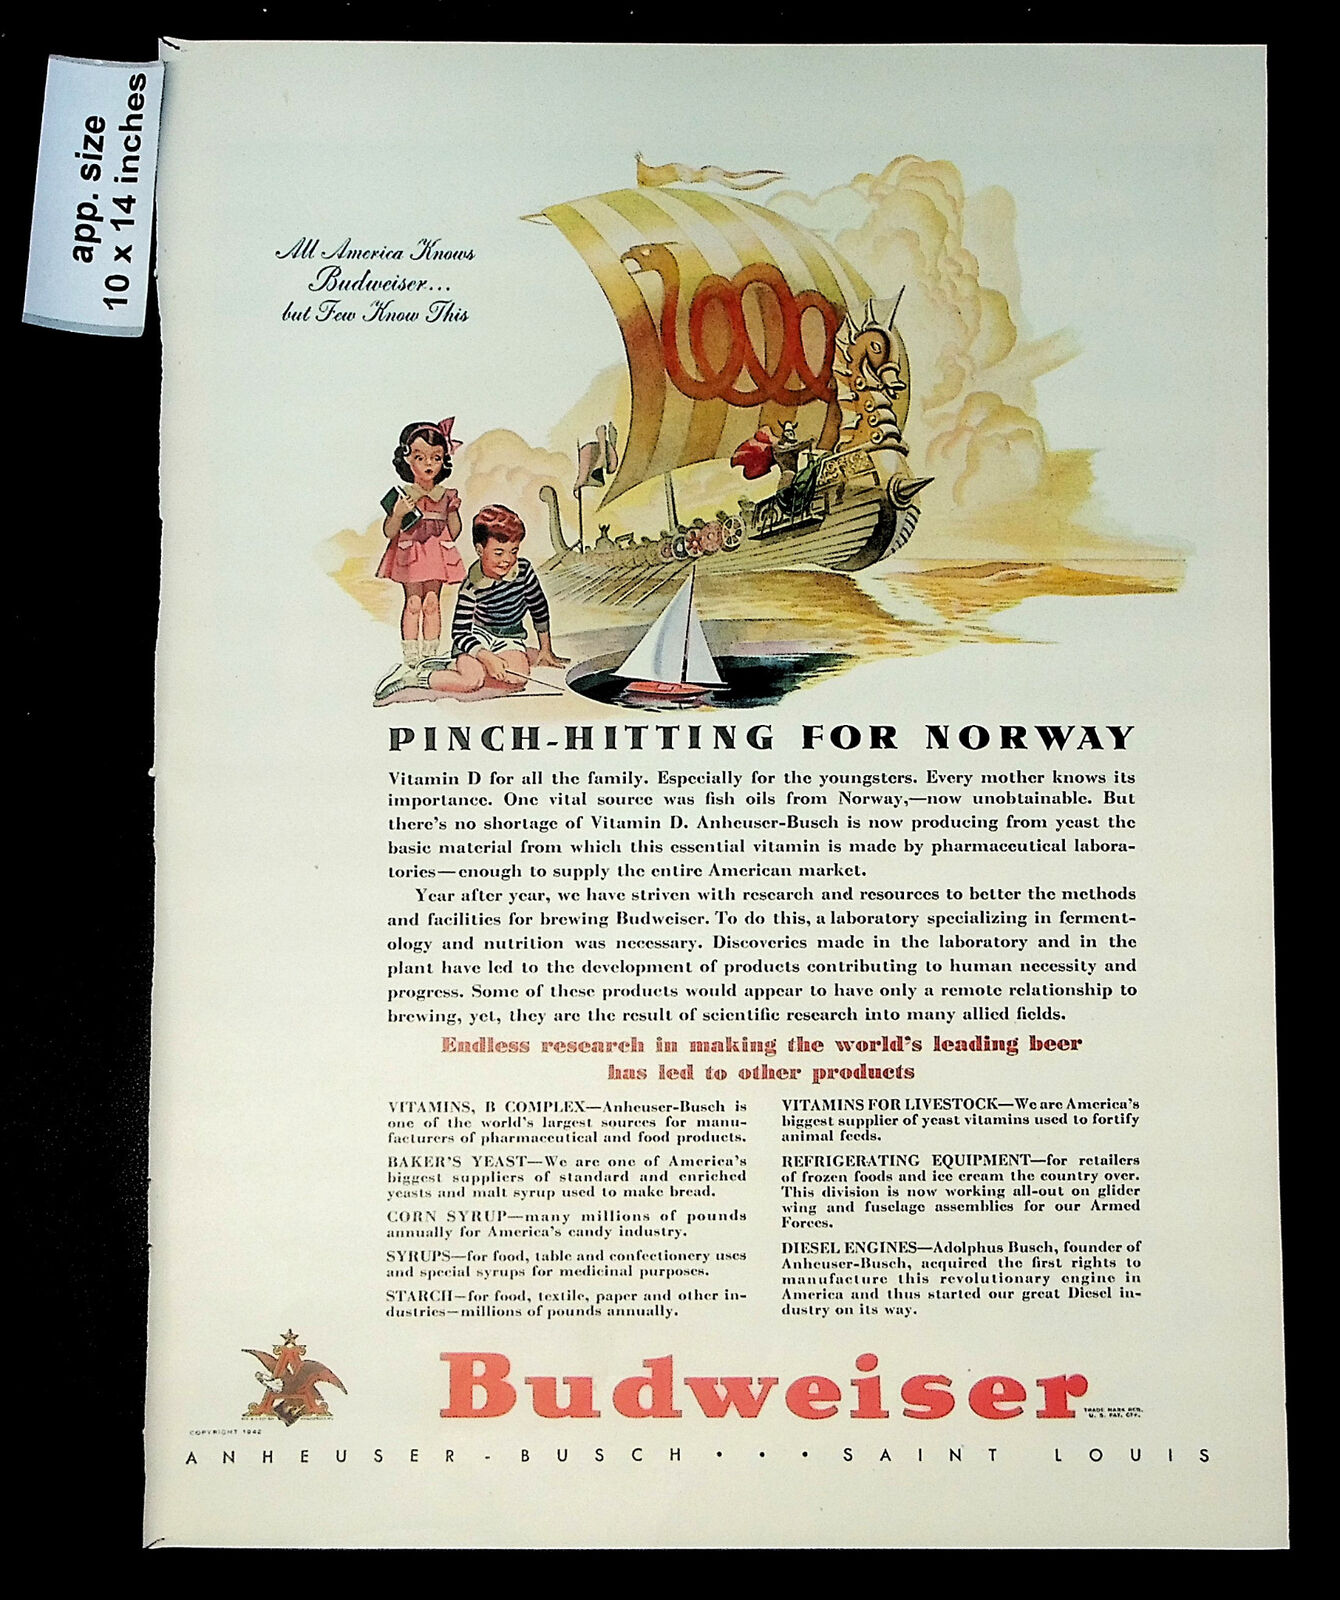 1942 Pinch-Hitting for Norway Budweiser Anheuser Busch Vintage Print Ad 41014